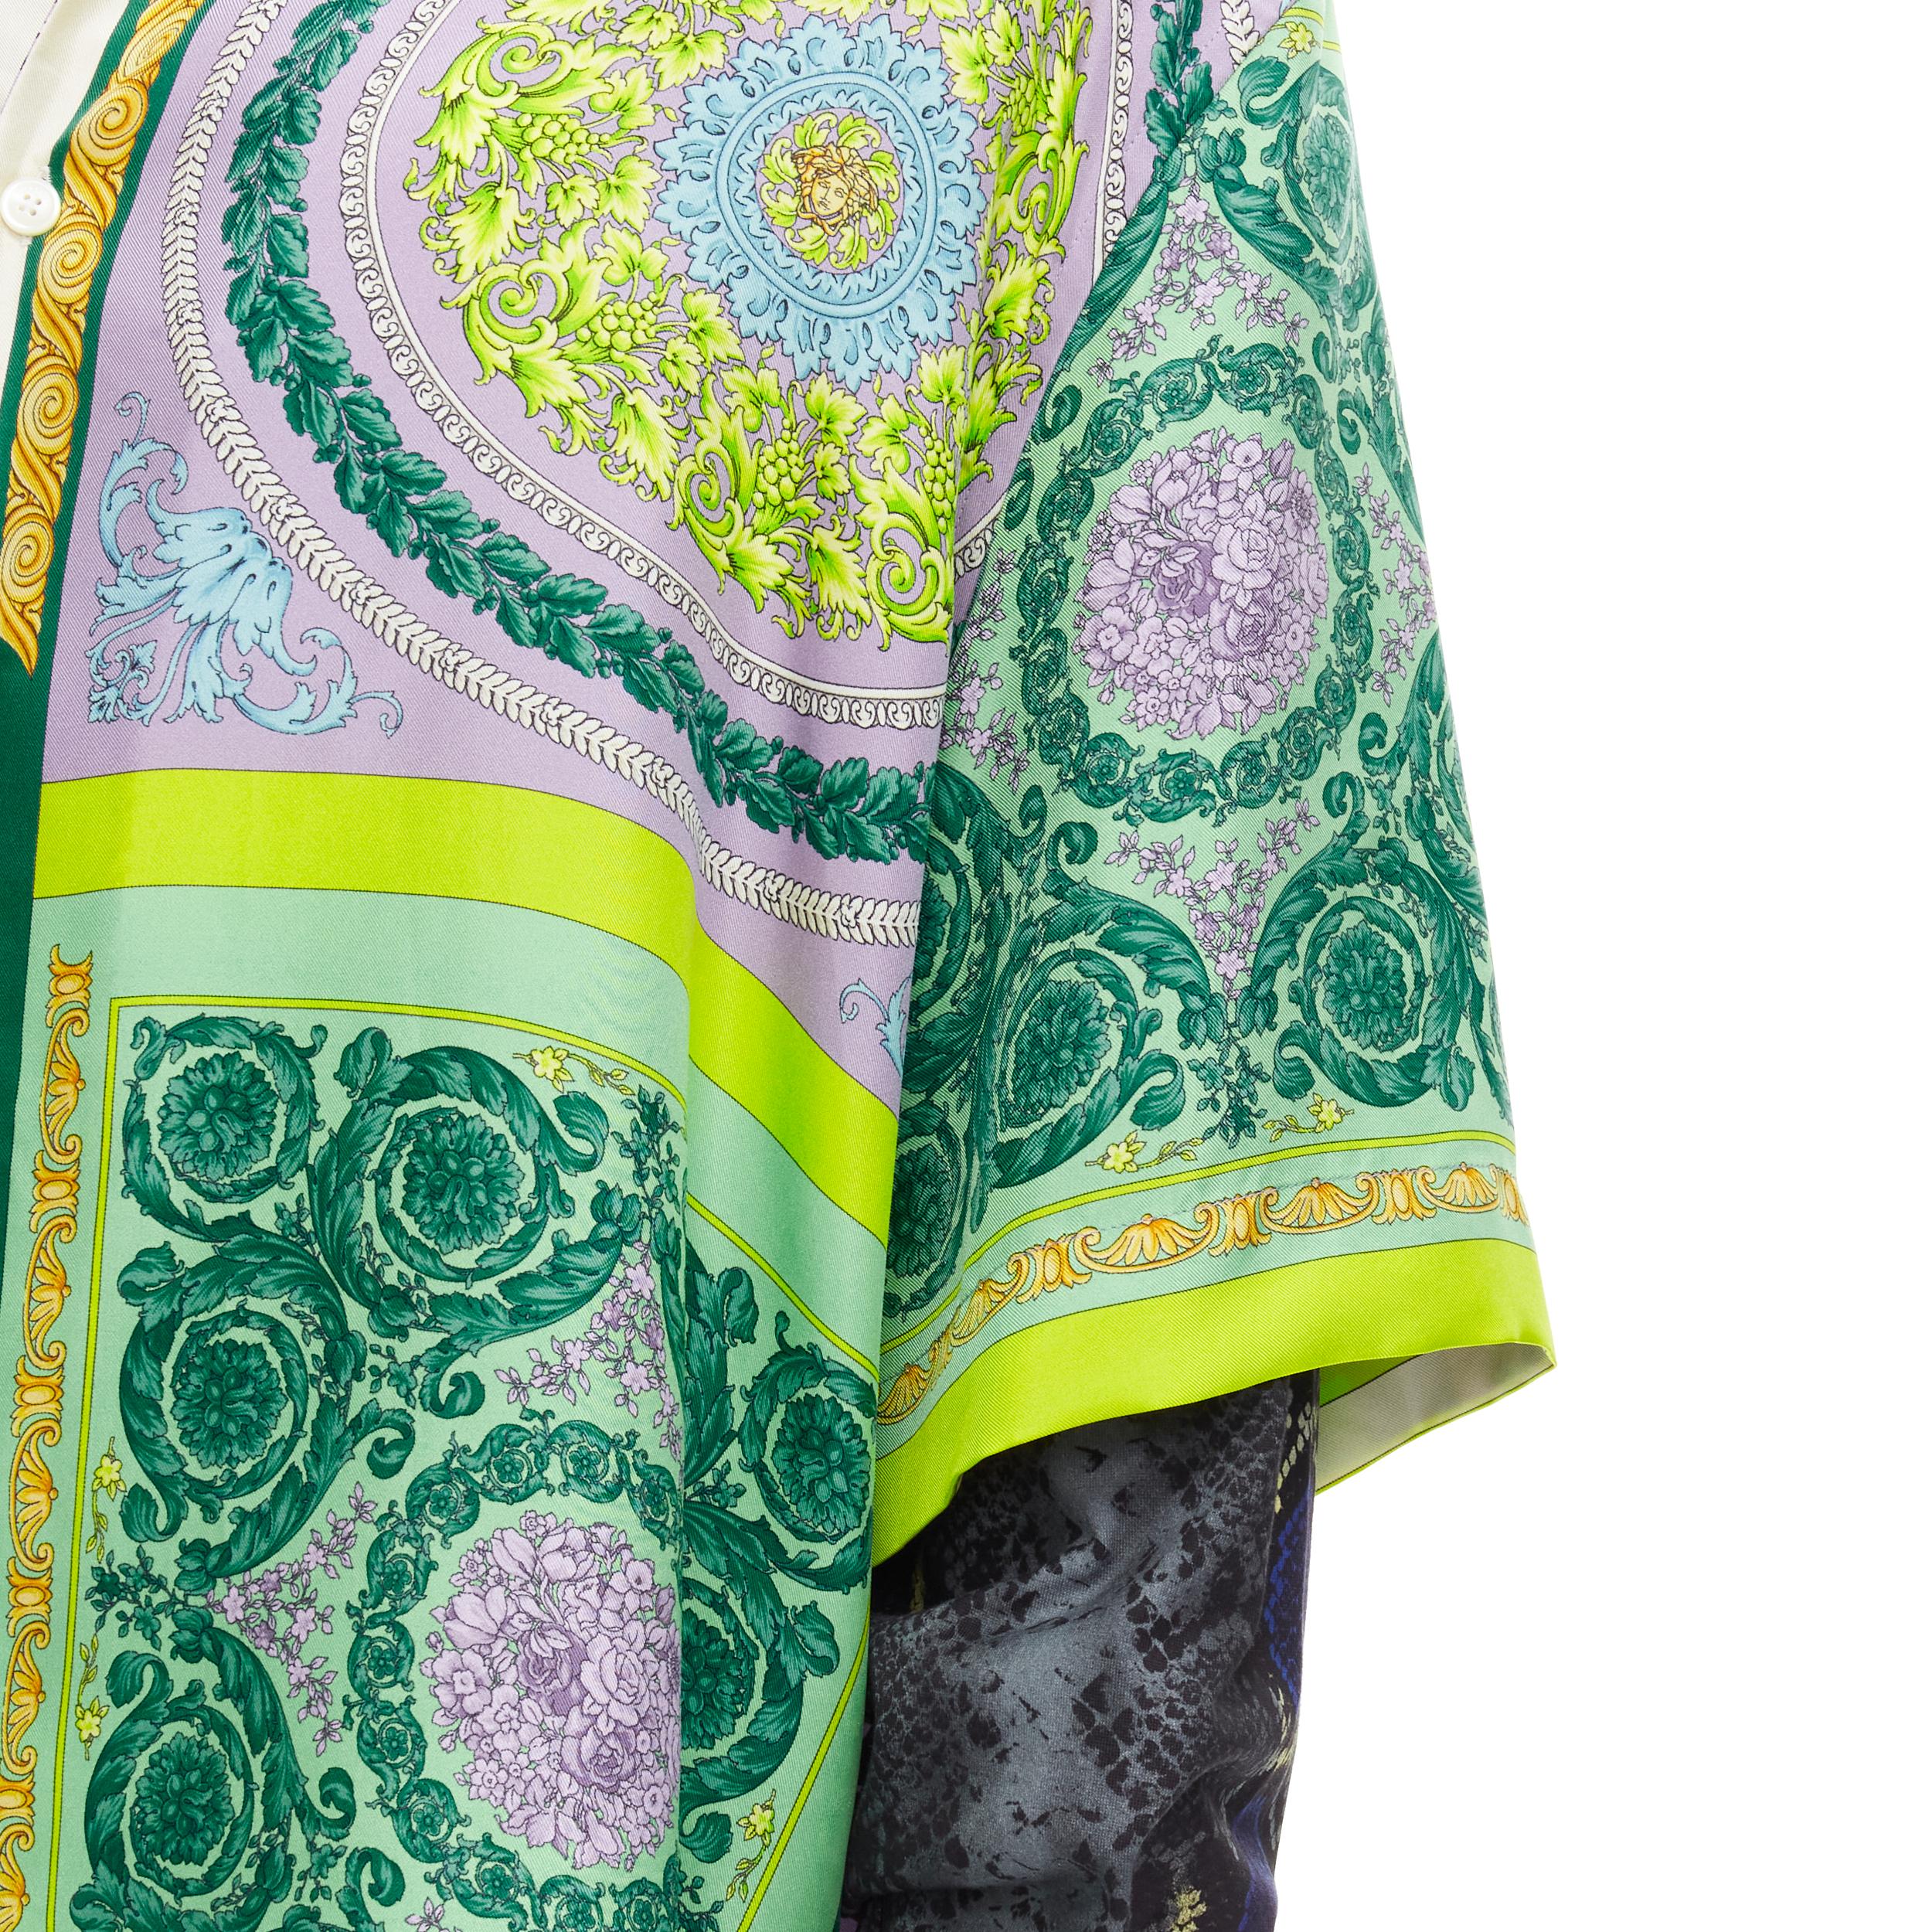 new VERSACE Mosaic Barocco Pop 100% silk green python double sleeve shirt EU41 L 
Reference: TGAS/C00957
Brand: Versace 
Designer: Donatella Versace 
Collection: Resort 2021 Runway 
Material: Silk 
Color: Green 
Pattern: Floral 
Closure: Button